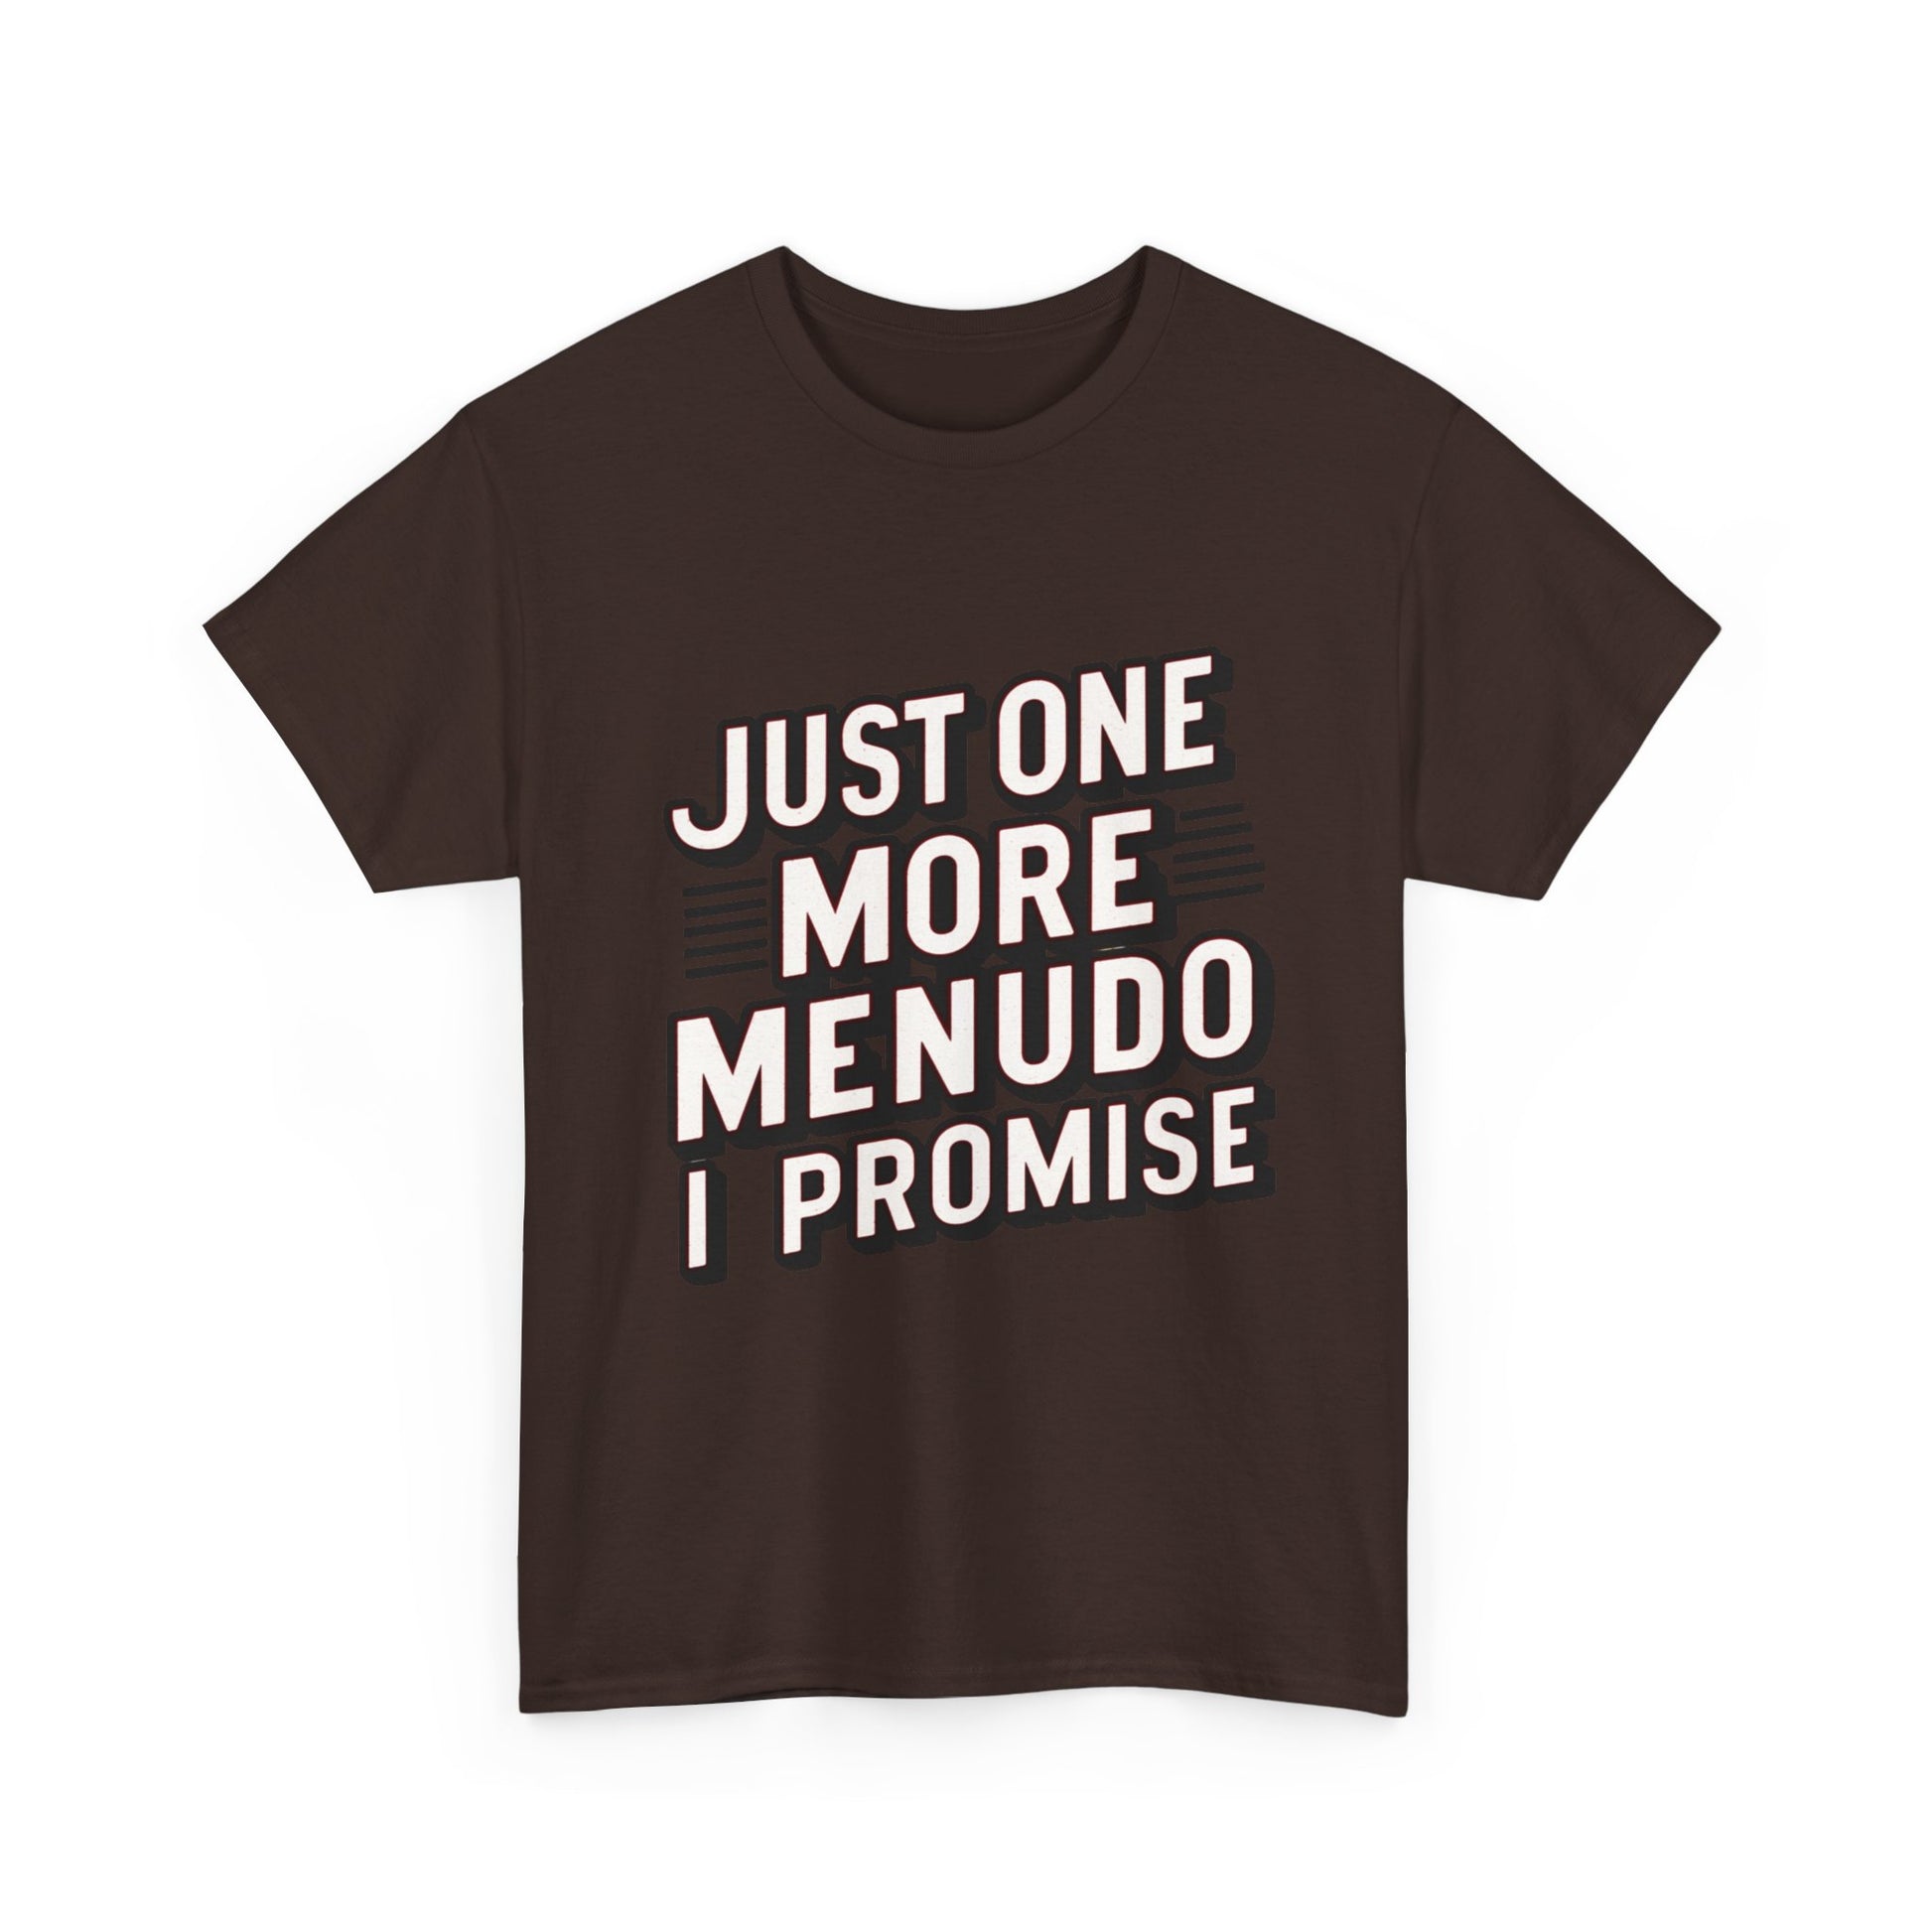 Just One More Menudo I Promise Mexican Food Graphic Unisex Heavy Cotton Tee Cotton Funny Humorous Graphic Soft Premium Unisex Men Women Dark Chocolate T-shirt Birthday Gift-21